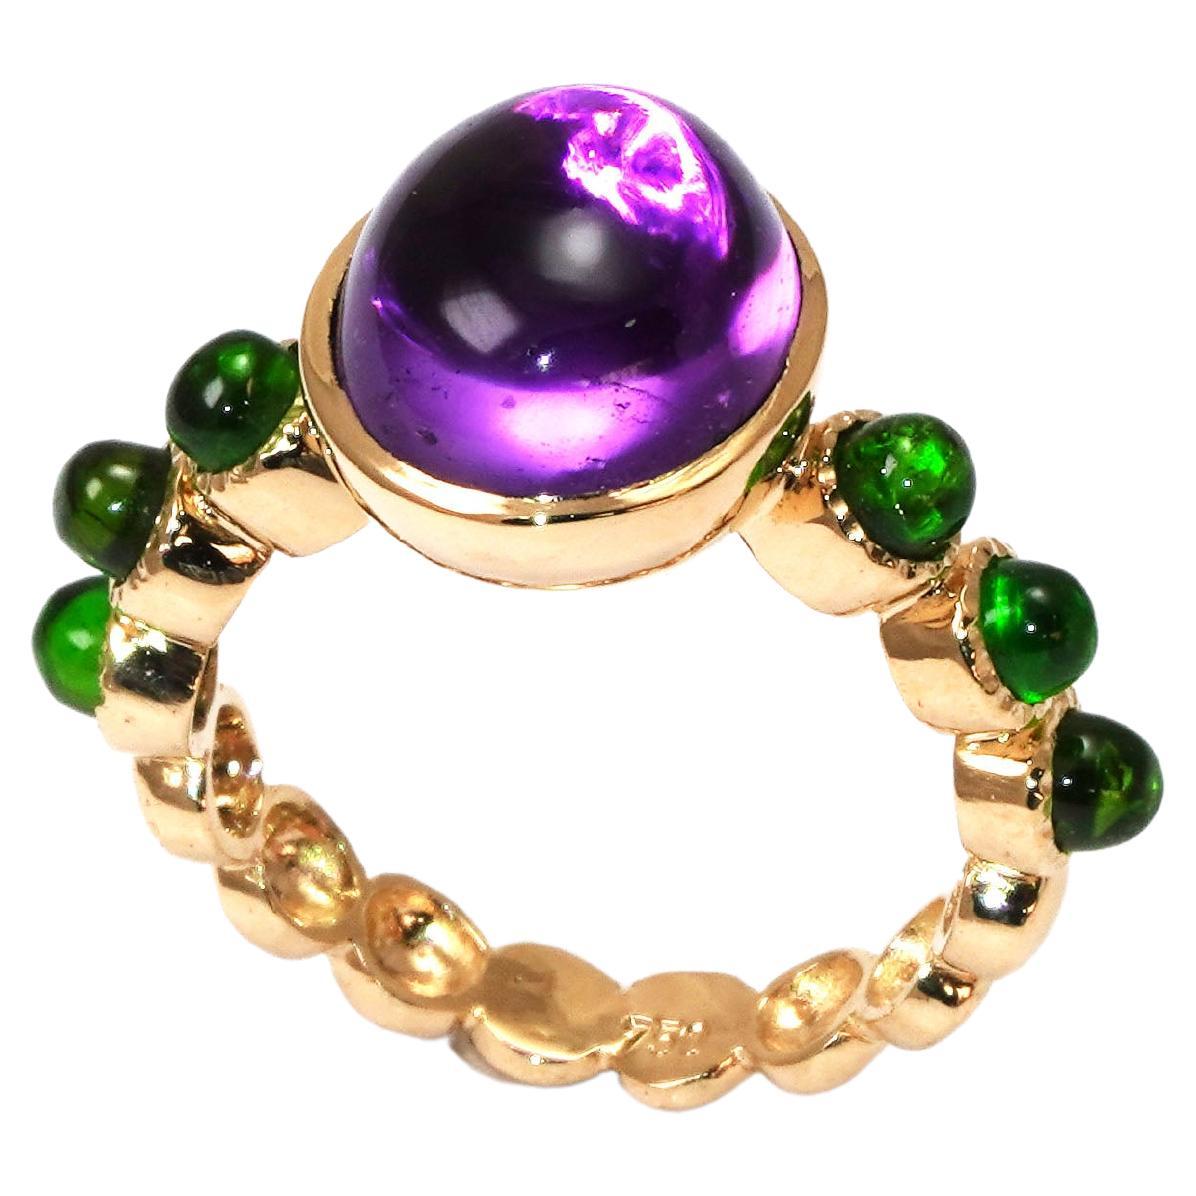 4.69 Carat Amethyst Diopside Cocktail Ring